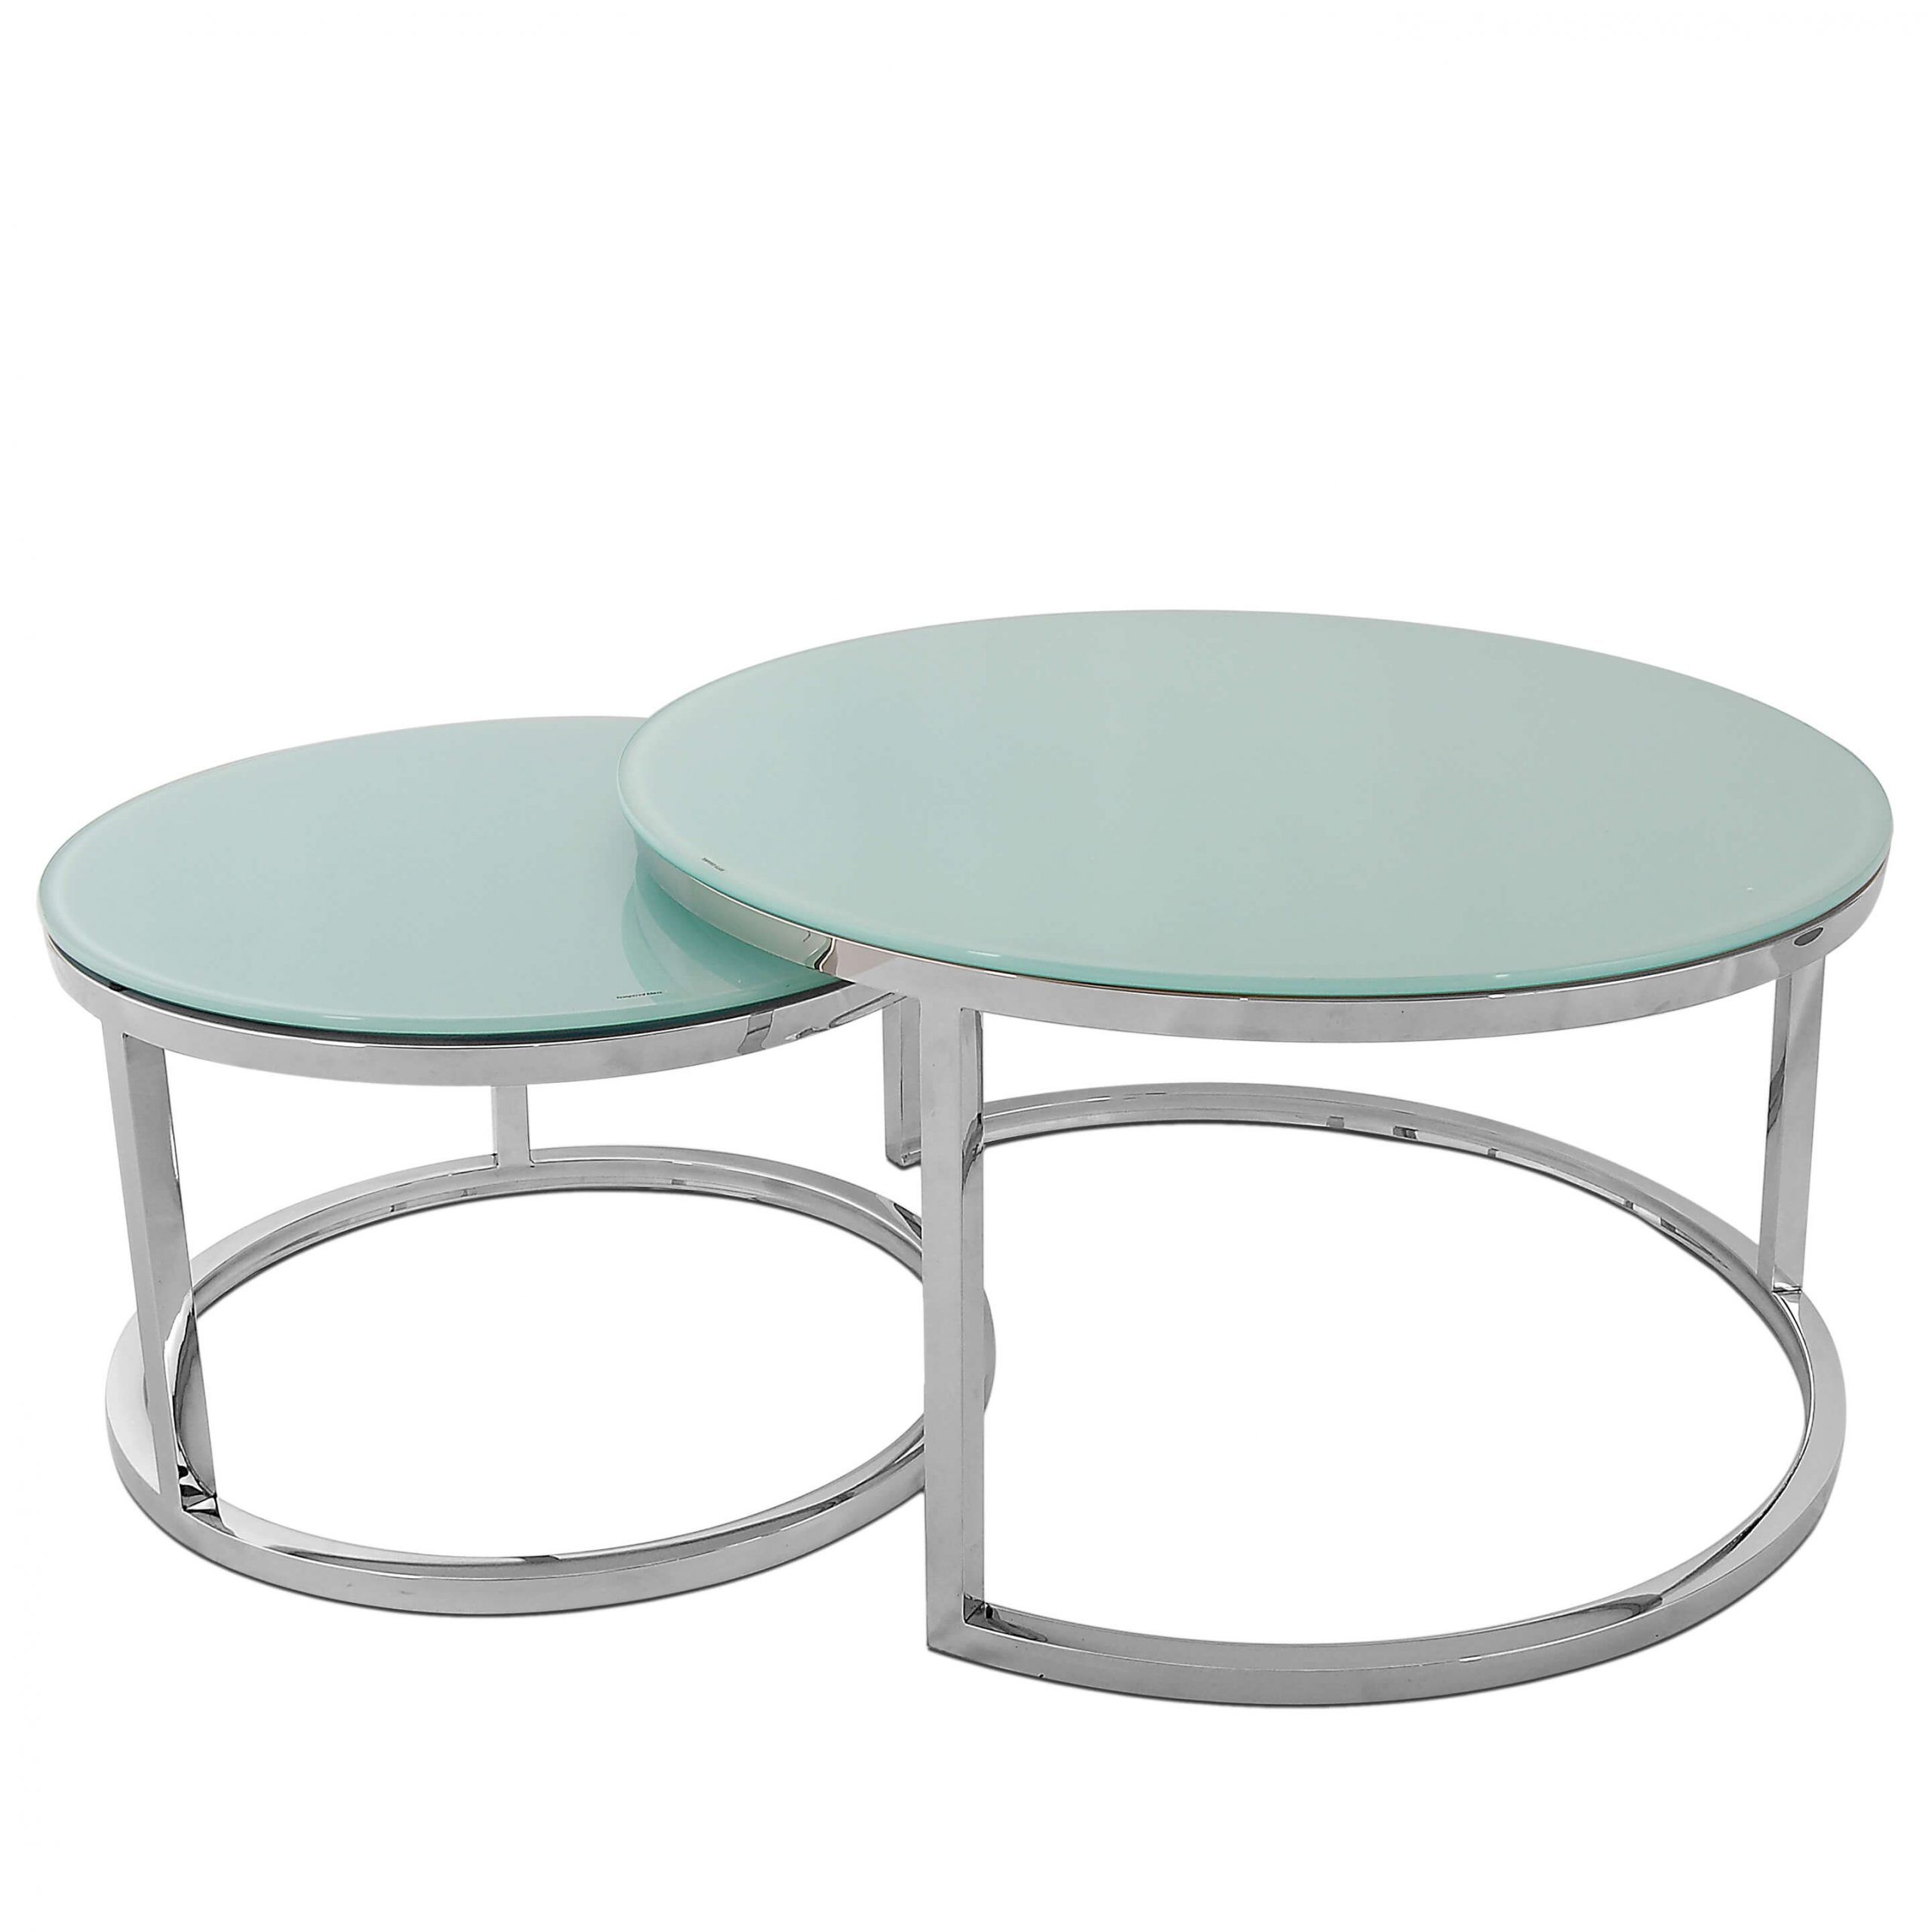 Eclipse A Set Of Two Stainless Steel Coffee Tables | Arte Dal Mondo In Tempered Glass Top Coffee Tables (View 12 of 15)